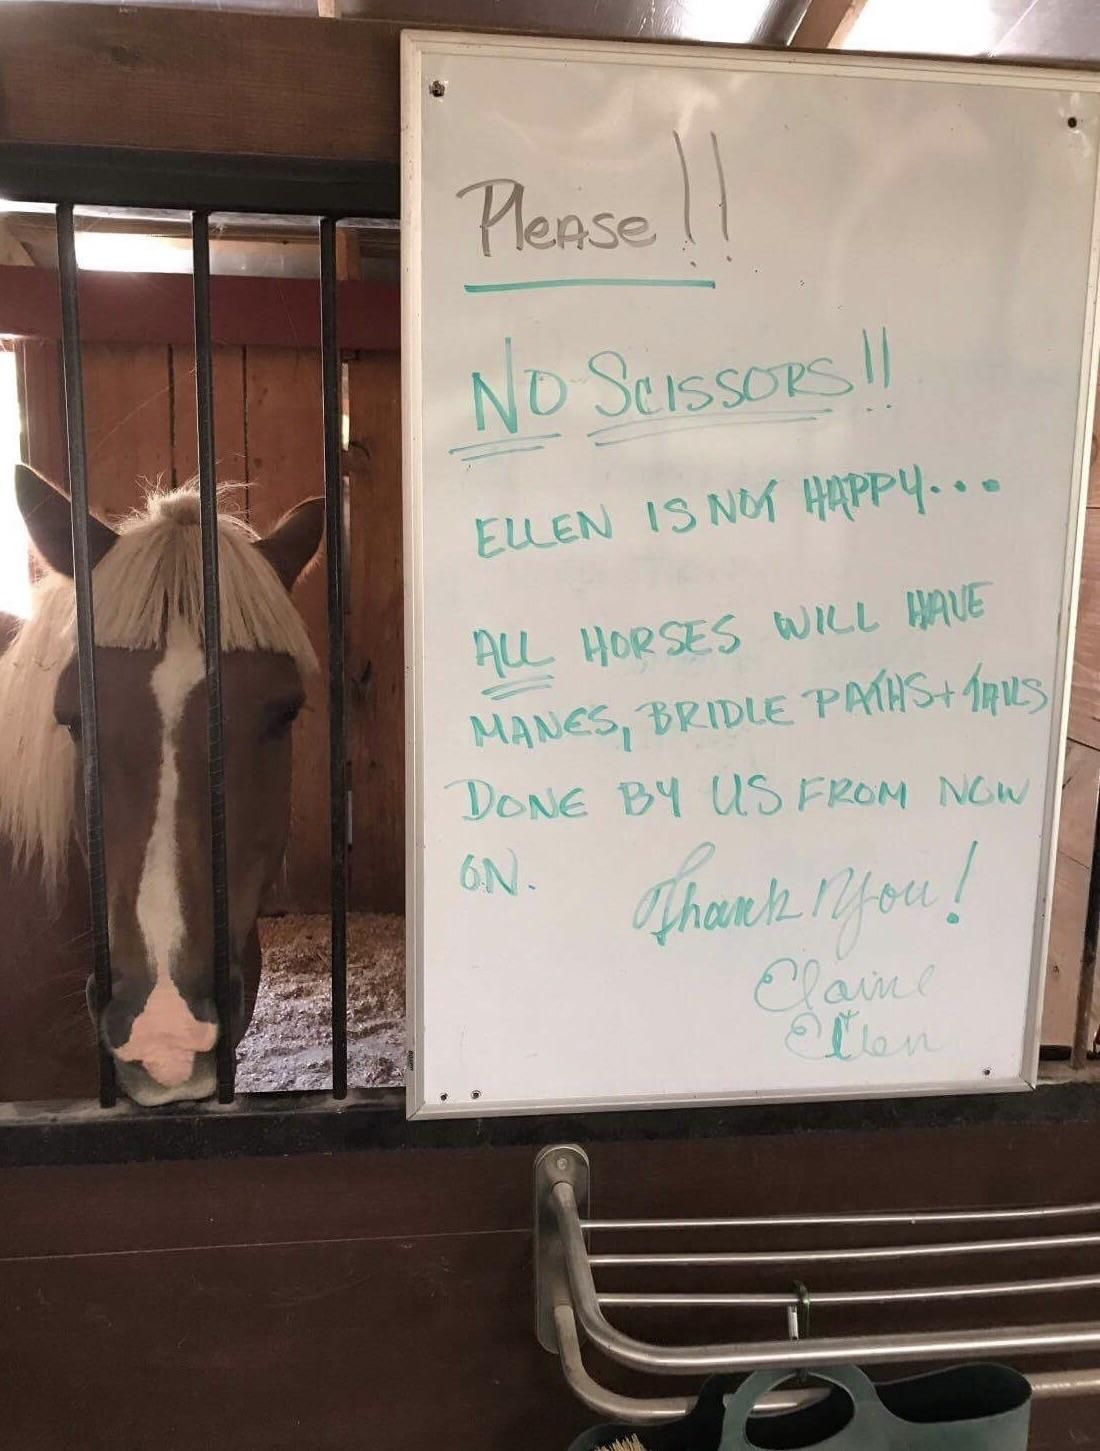 So my dad calls me the other day, says he got in trouble at the barn for cutting a horses hair and everyone's pissed off. I felt bad for him until I got this picture from my mother.